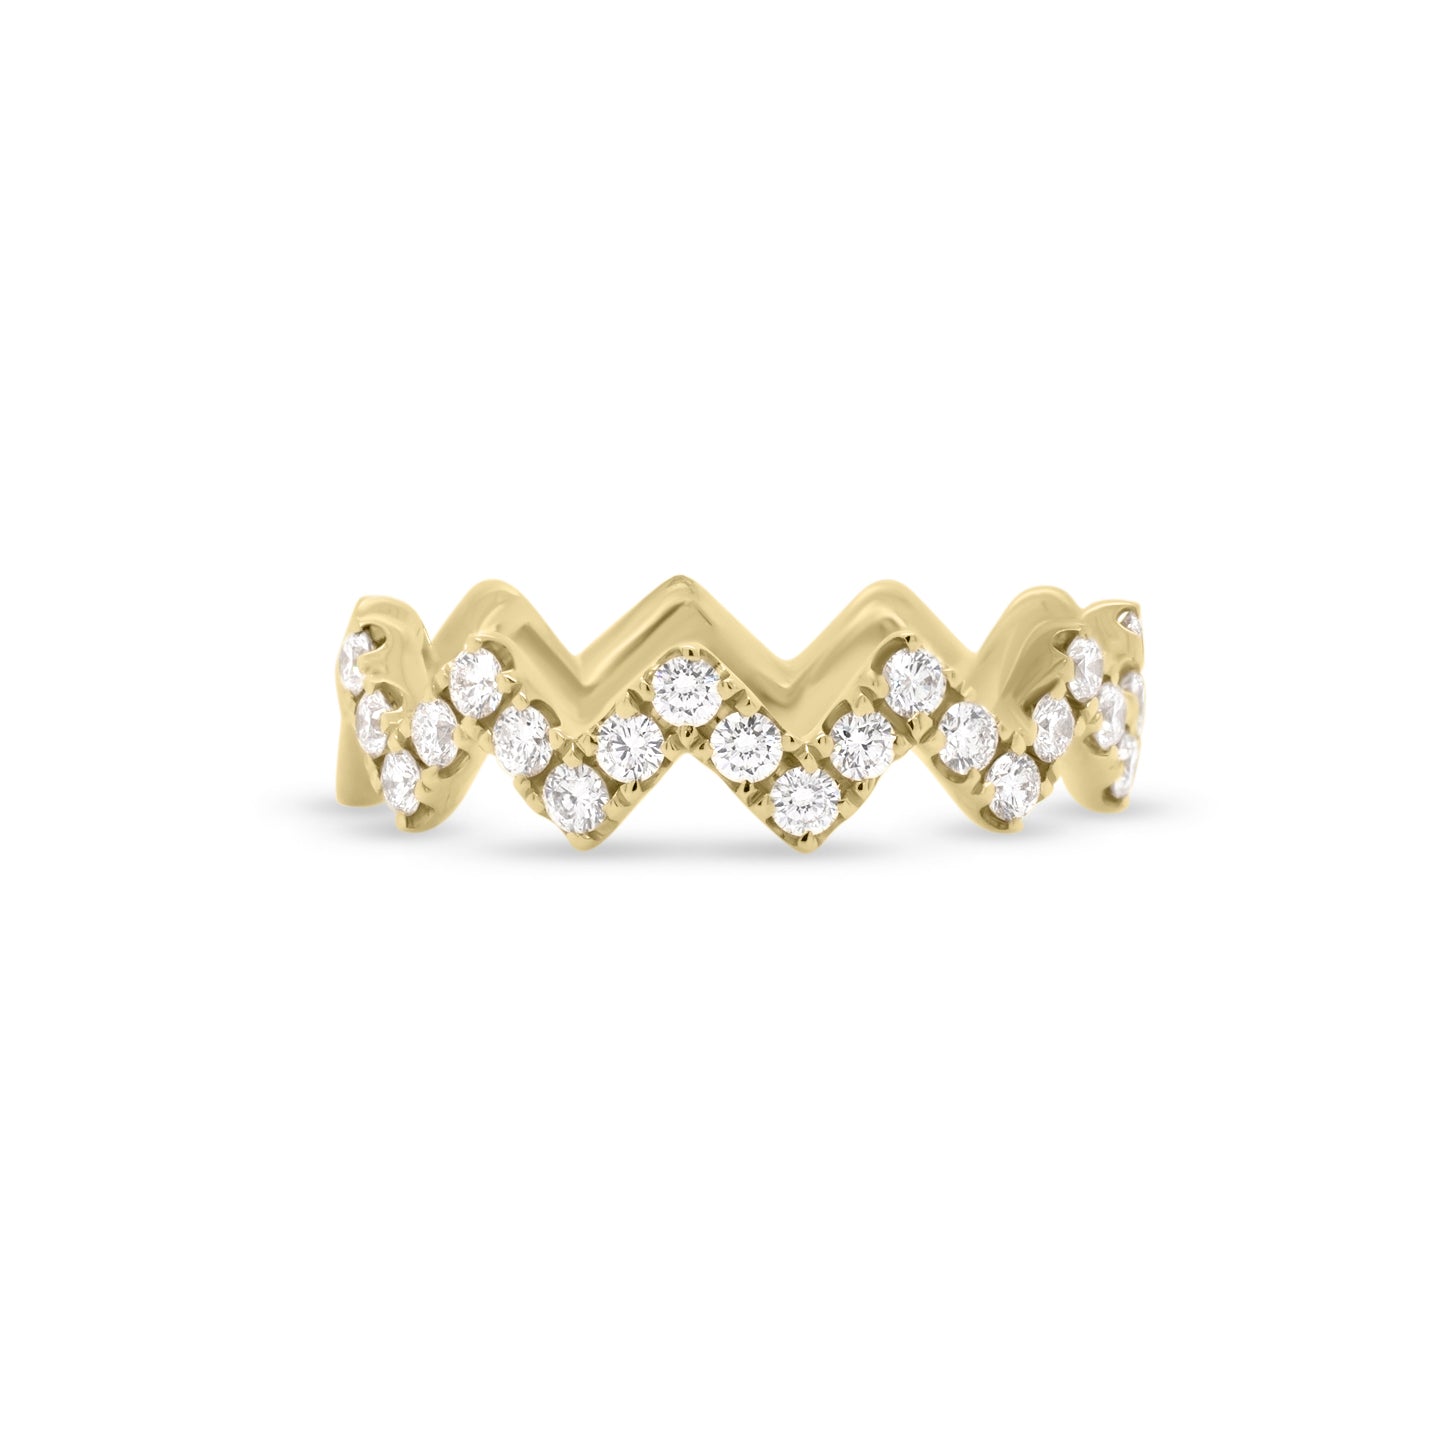 Diamond Zig-Zag Stackable Ring  - 18K gold weighing 3.75 grams  - 21 round diamonds totaling 0.44 carats